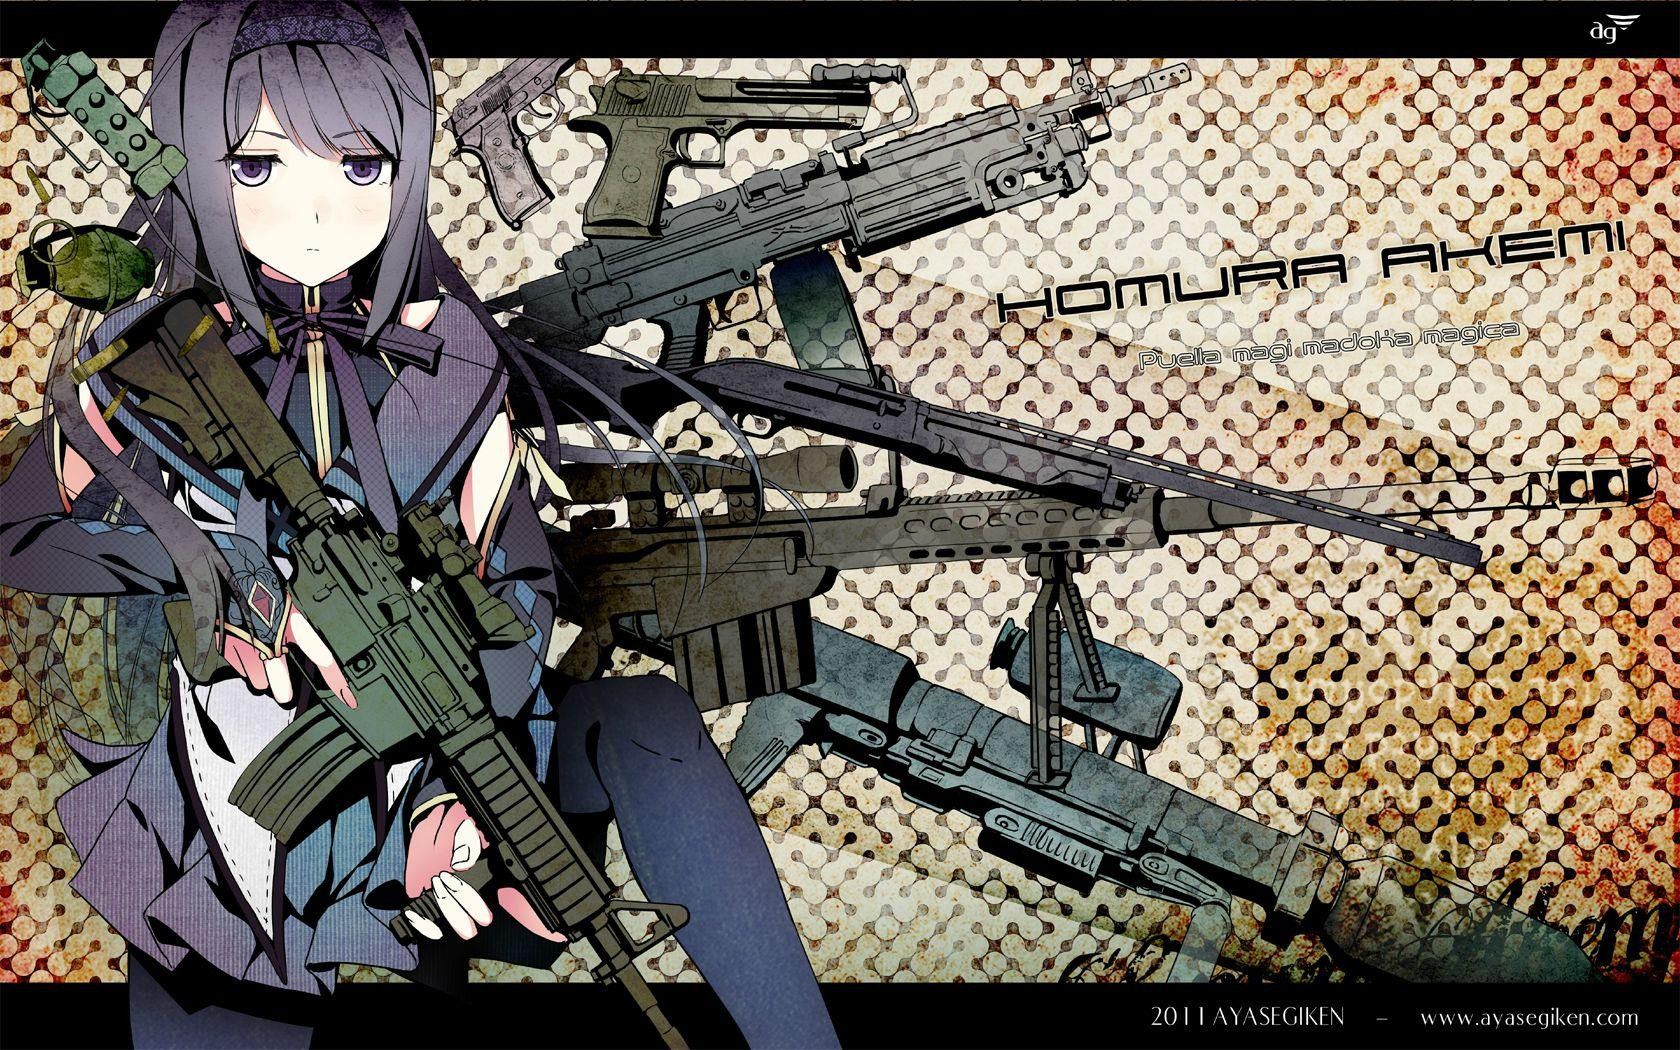 Secondary image of a pretty girl with a firearm, etc. 4 [non-erotic] 24